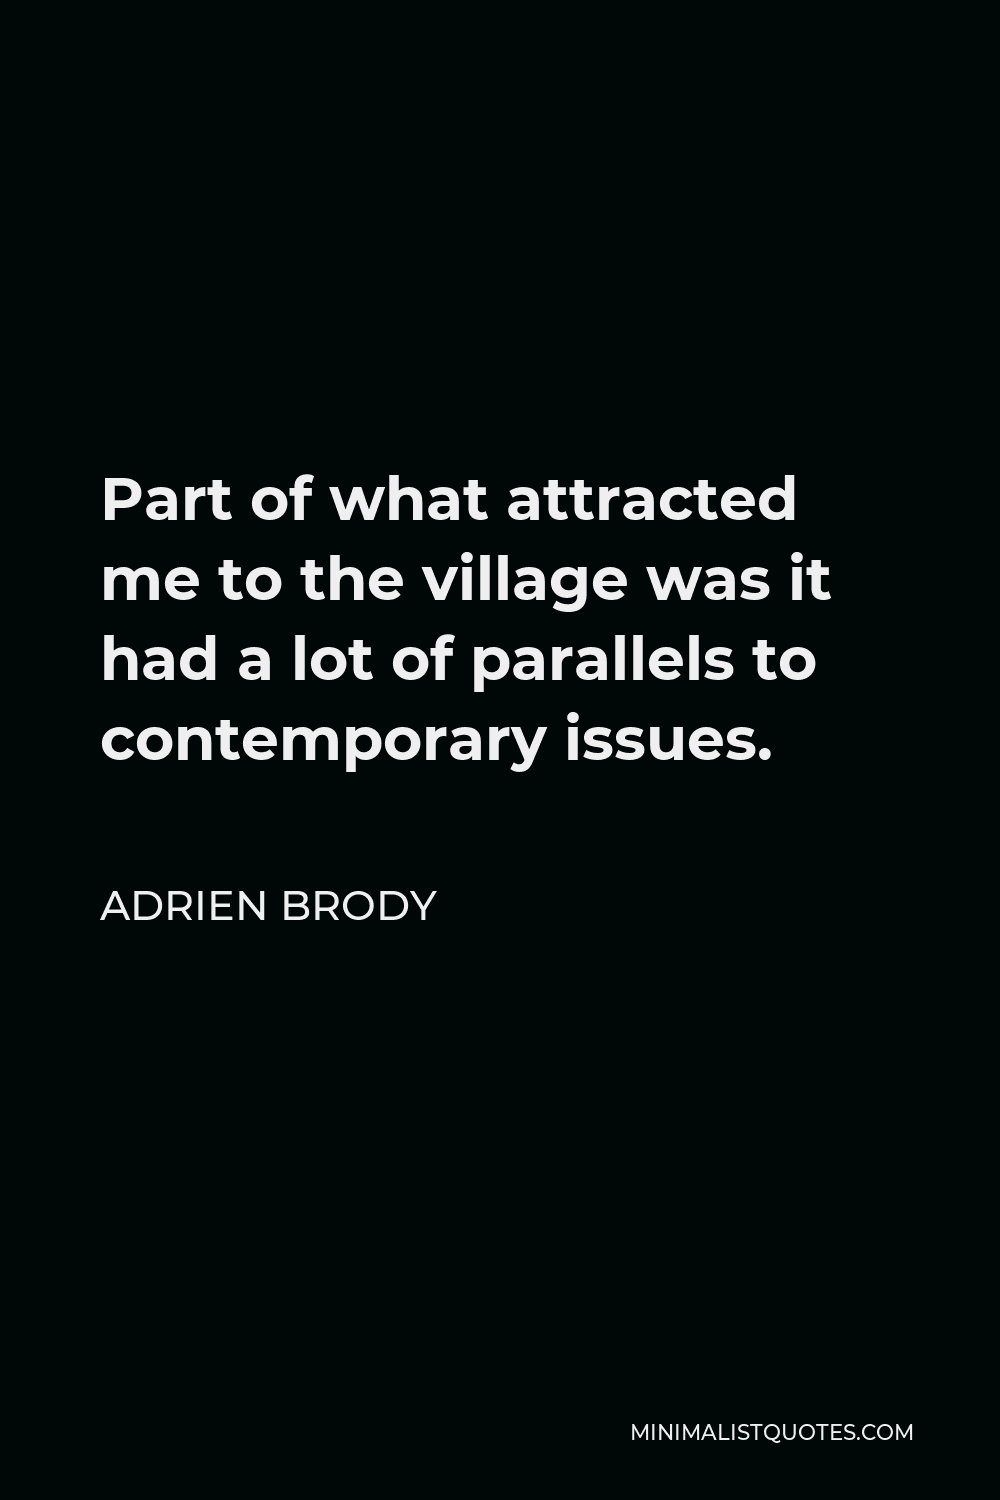 Adrien Brody Quote - Part of what attracted me to the village was it had a lot of parallels to contemporary issues.